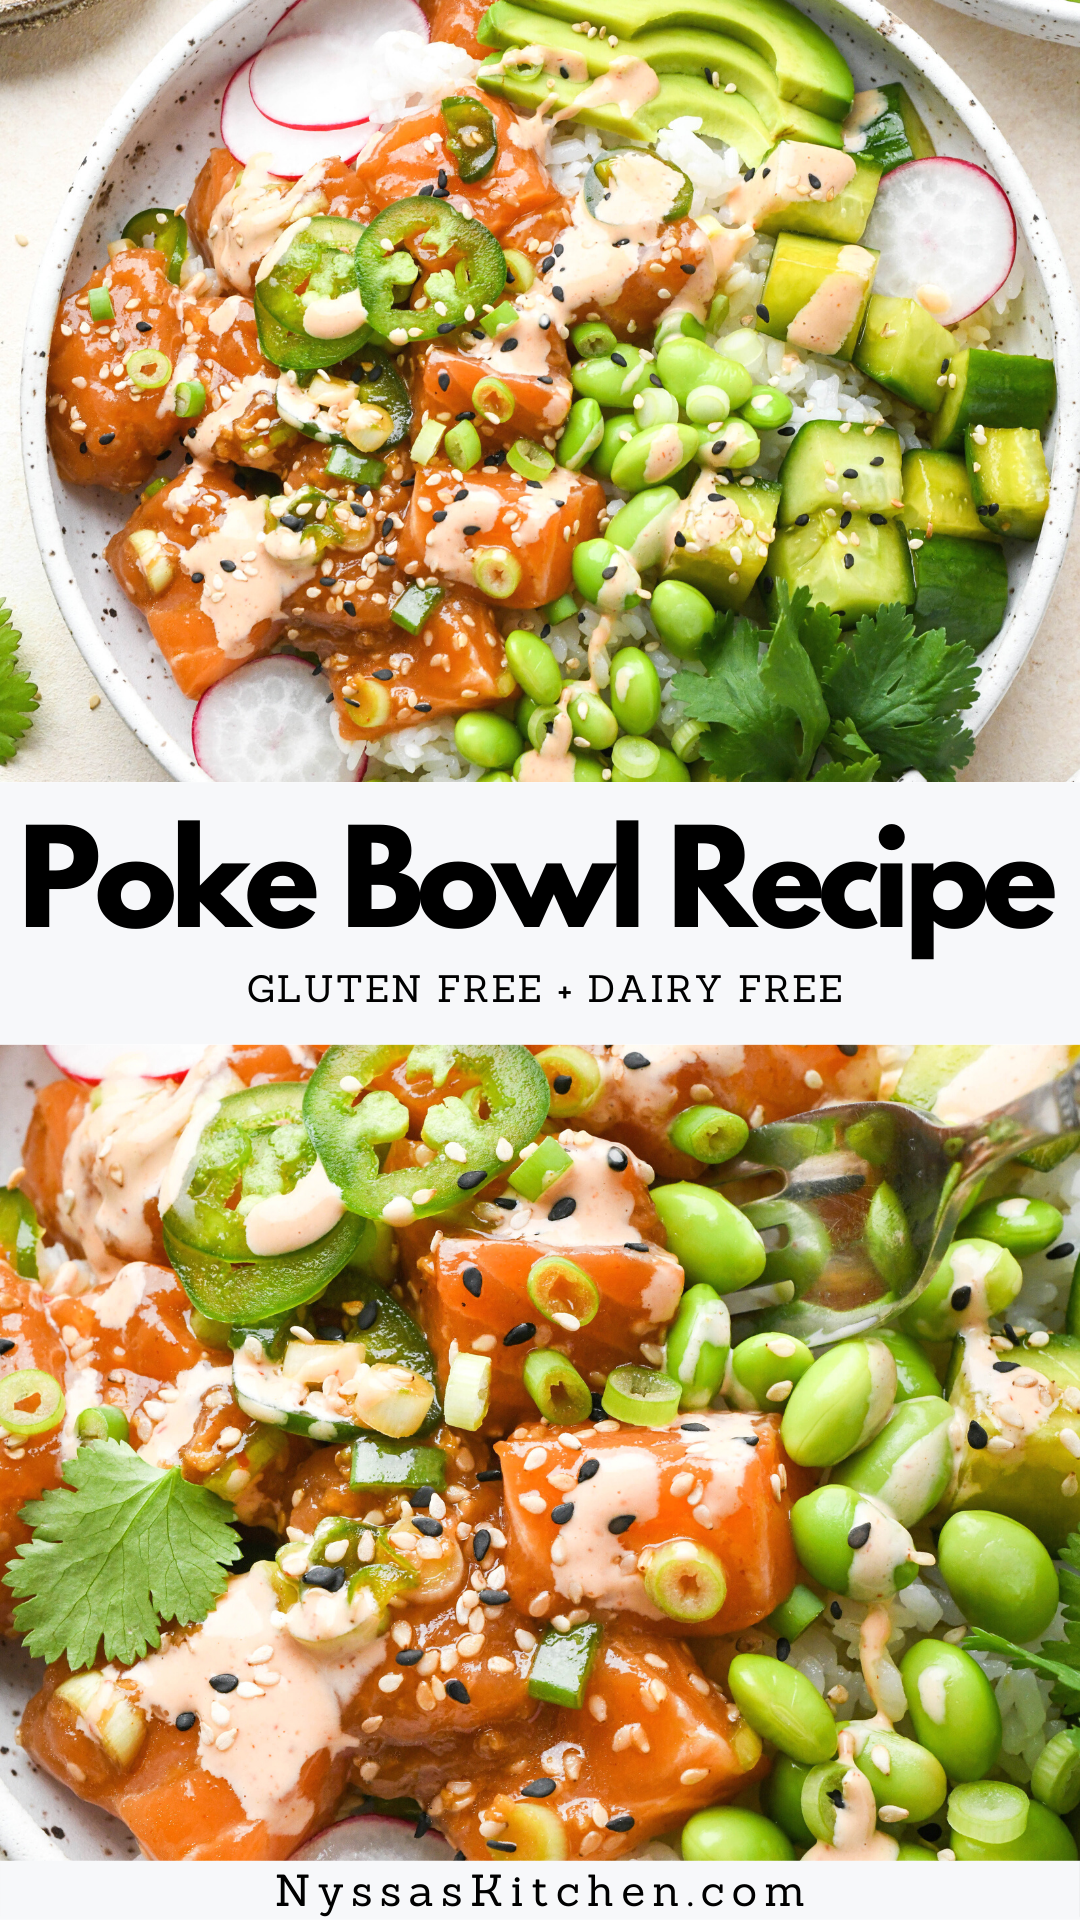 A poke bowl recipe that's flavorful and easy to make at home! Made with sushi grade salmon (or tuna) marinated in a simple sauce of coconut aminos, sesame oil, and rice vinegar. Served over rice with lots of delicious toppings and a simple spicy mayo. Easy to personalize and the best fresh lunch or dinner. Makes 2 poke bowls, but recipe can easily be doubled. Gluten free, dairy free, Whole30 / paleo option.